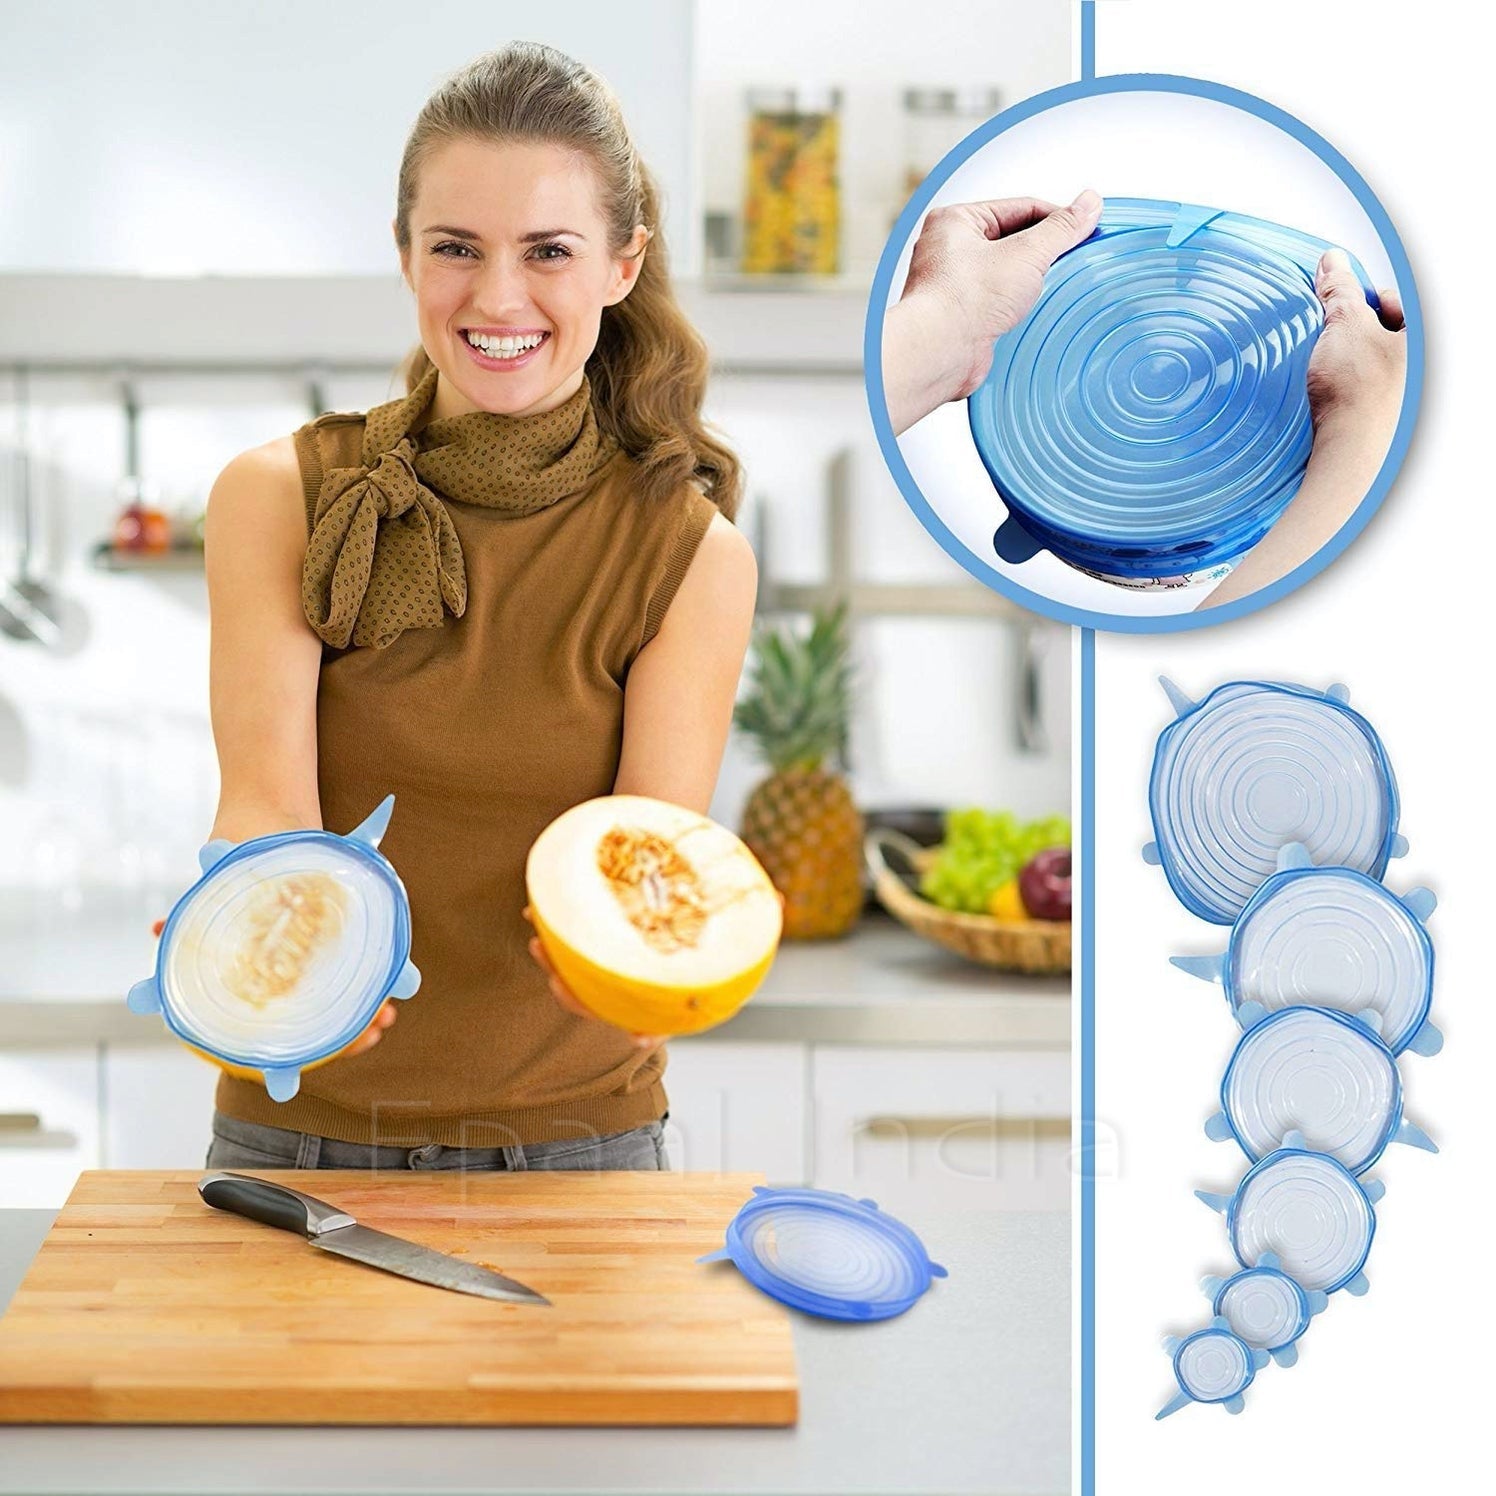 Set of 6 Reusable Safety Silicone Stretch Dishwasher Lids Flexible Covers - Light Blue